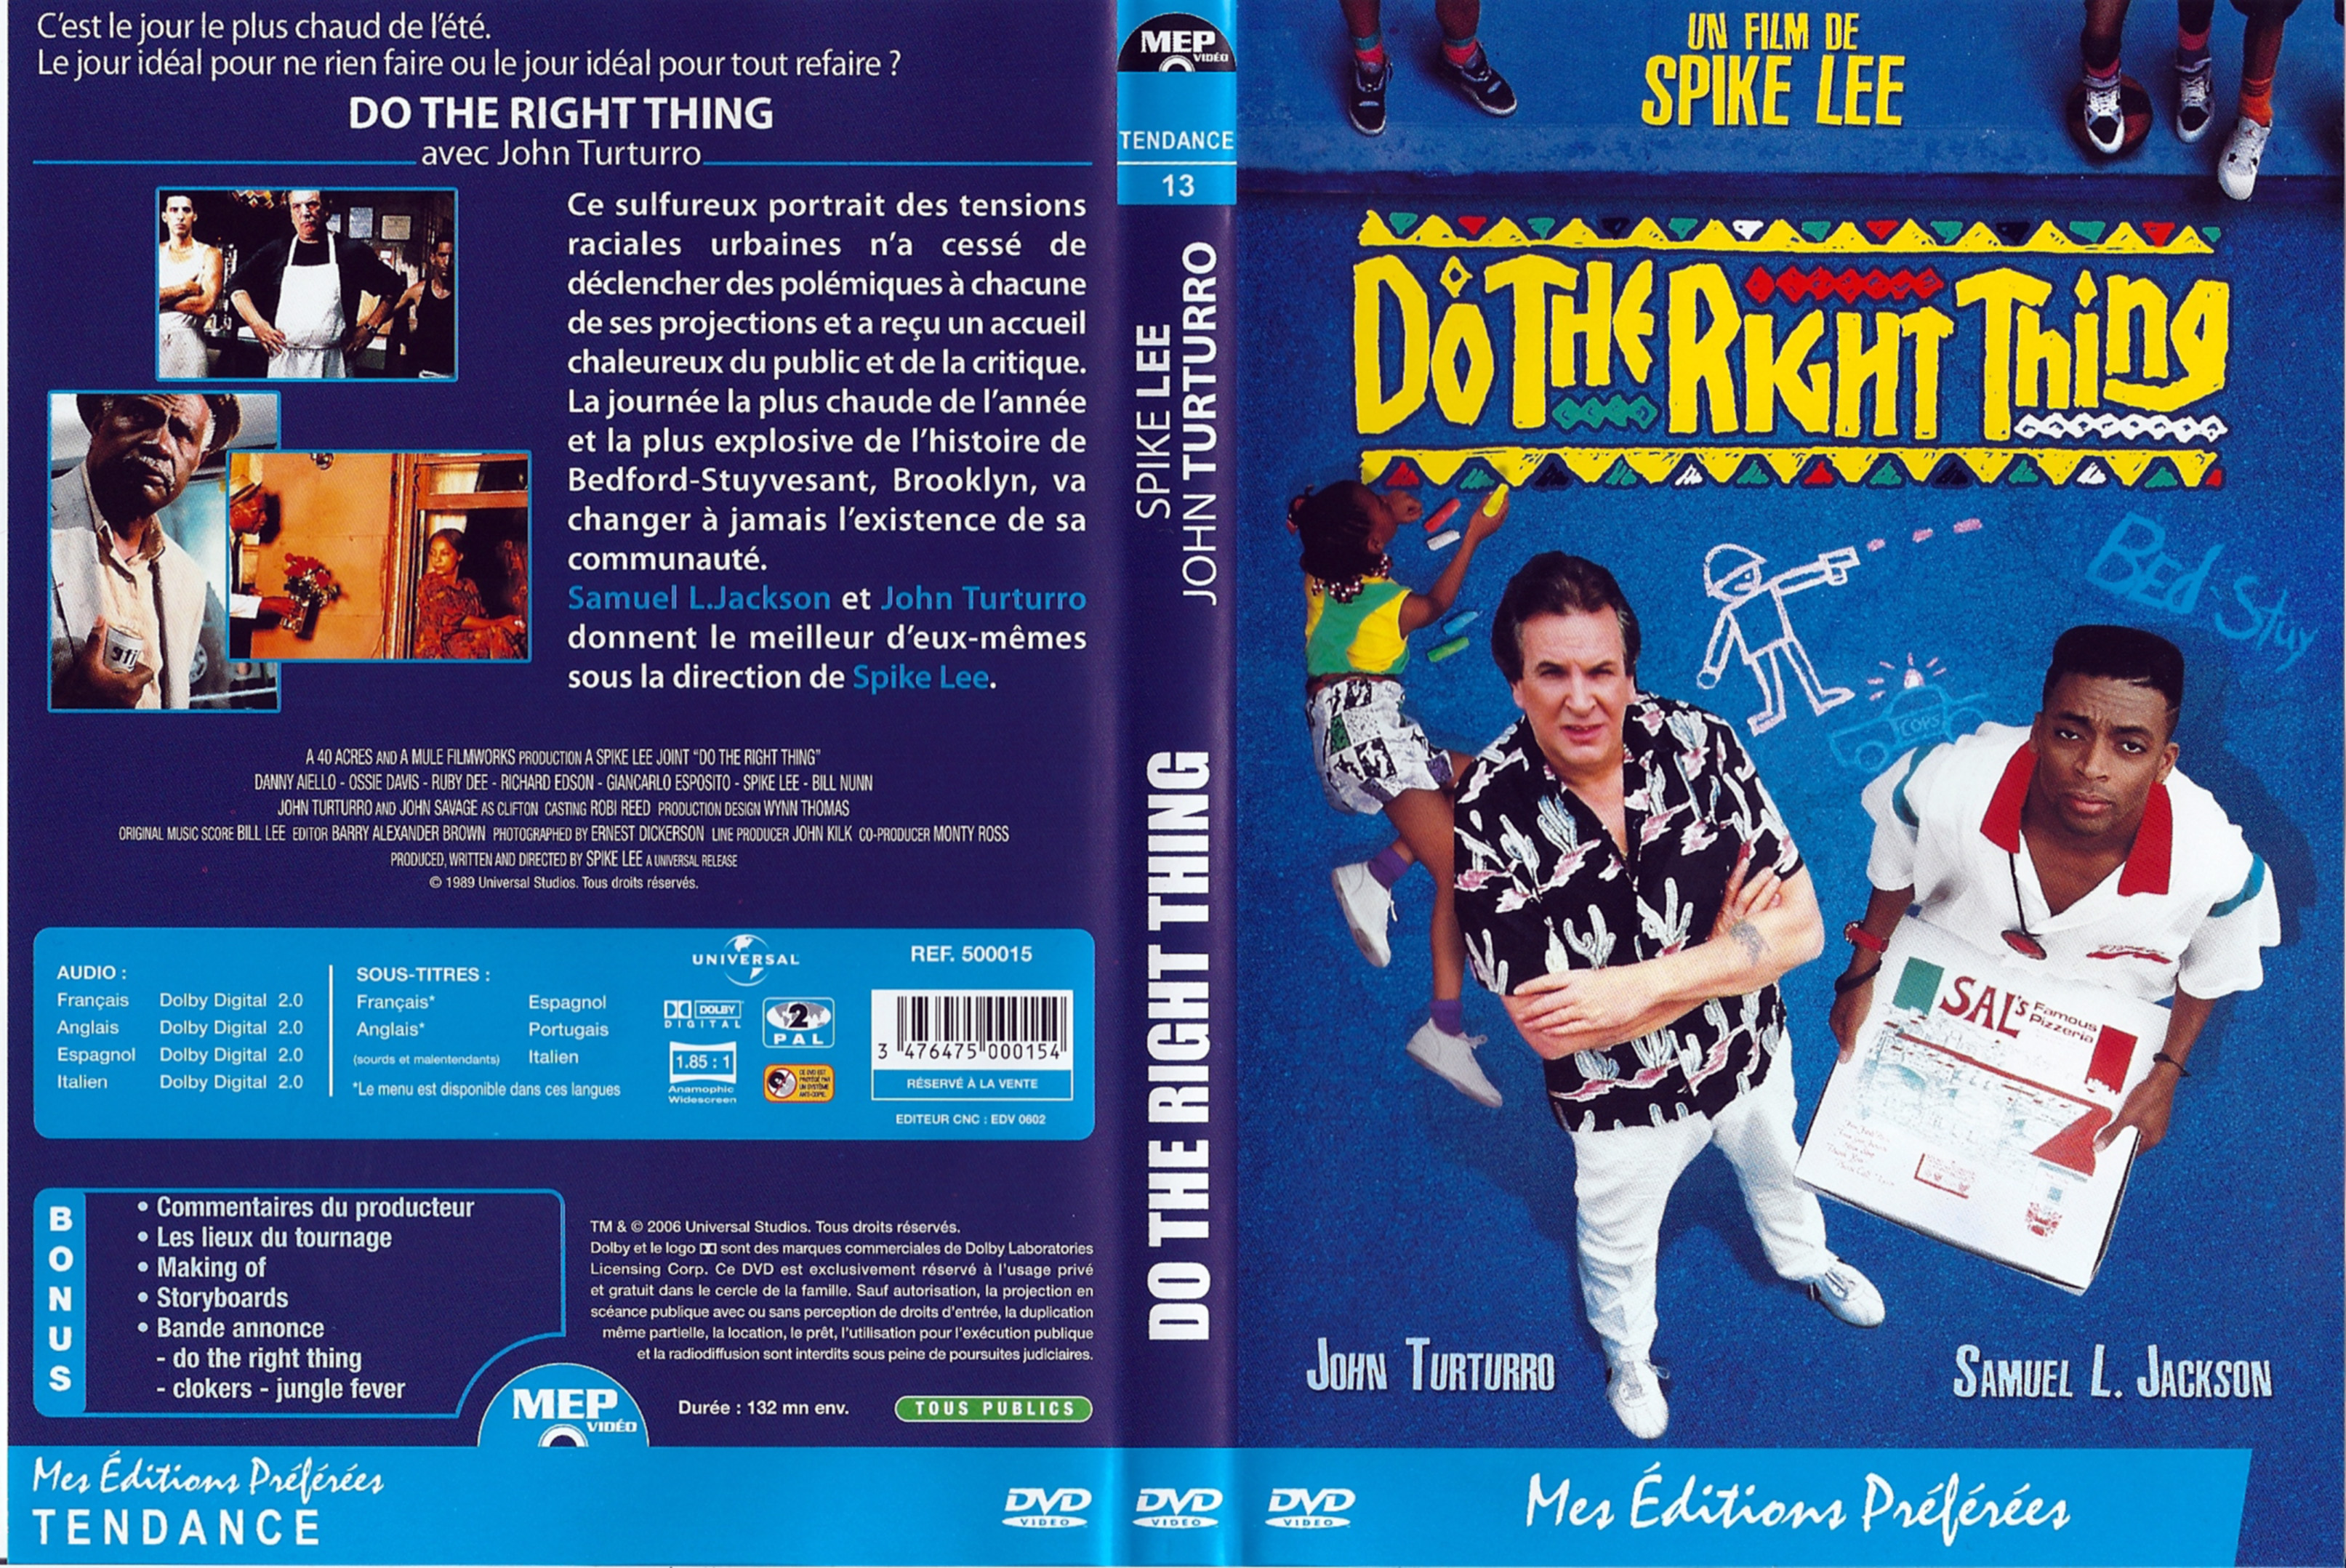 Jaquette DVD Do the right thing v2